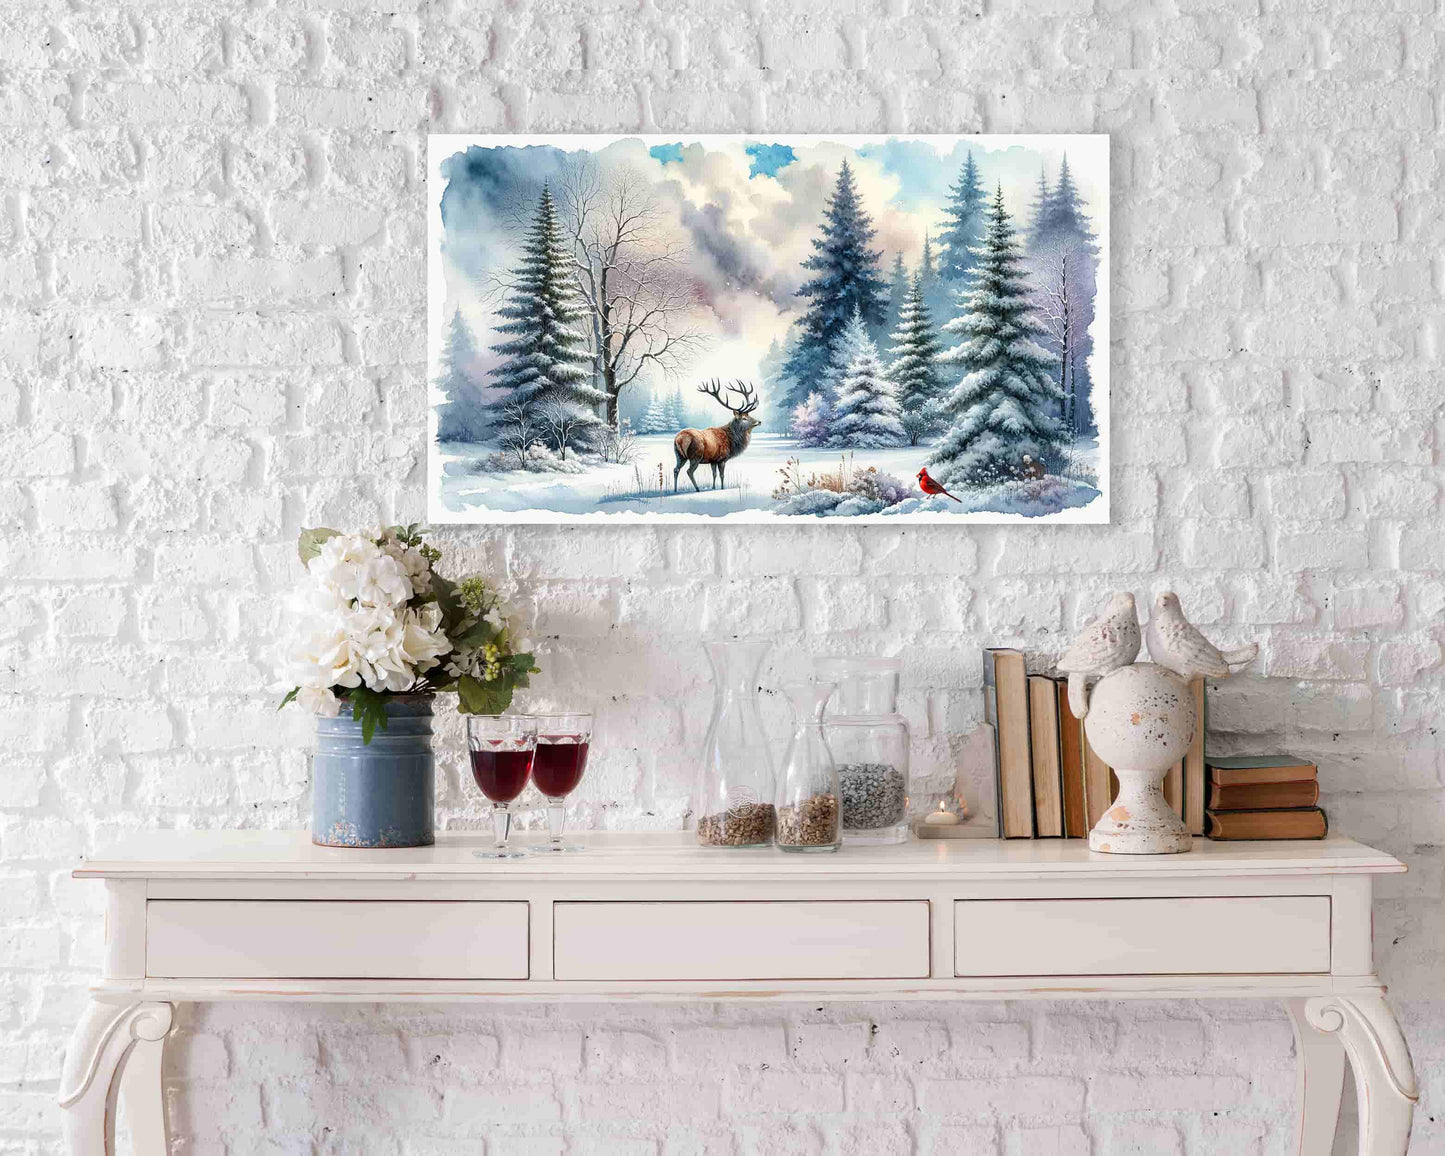 "Whispers of the Winter Wood - Stag and Cardinal in Snowy Serenity" Wrapped Canvas Wall Art Prints